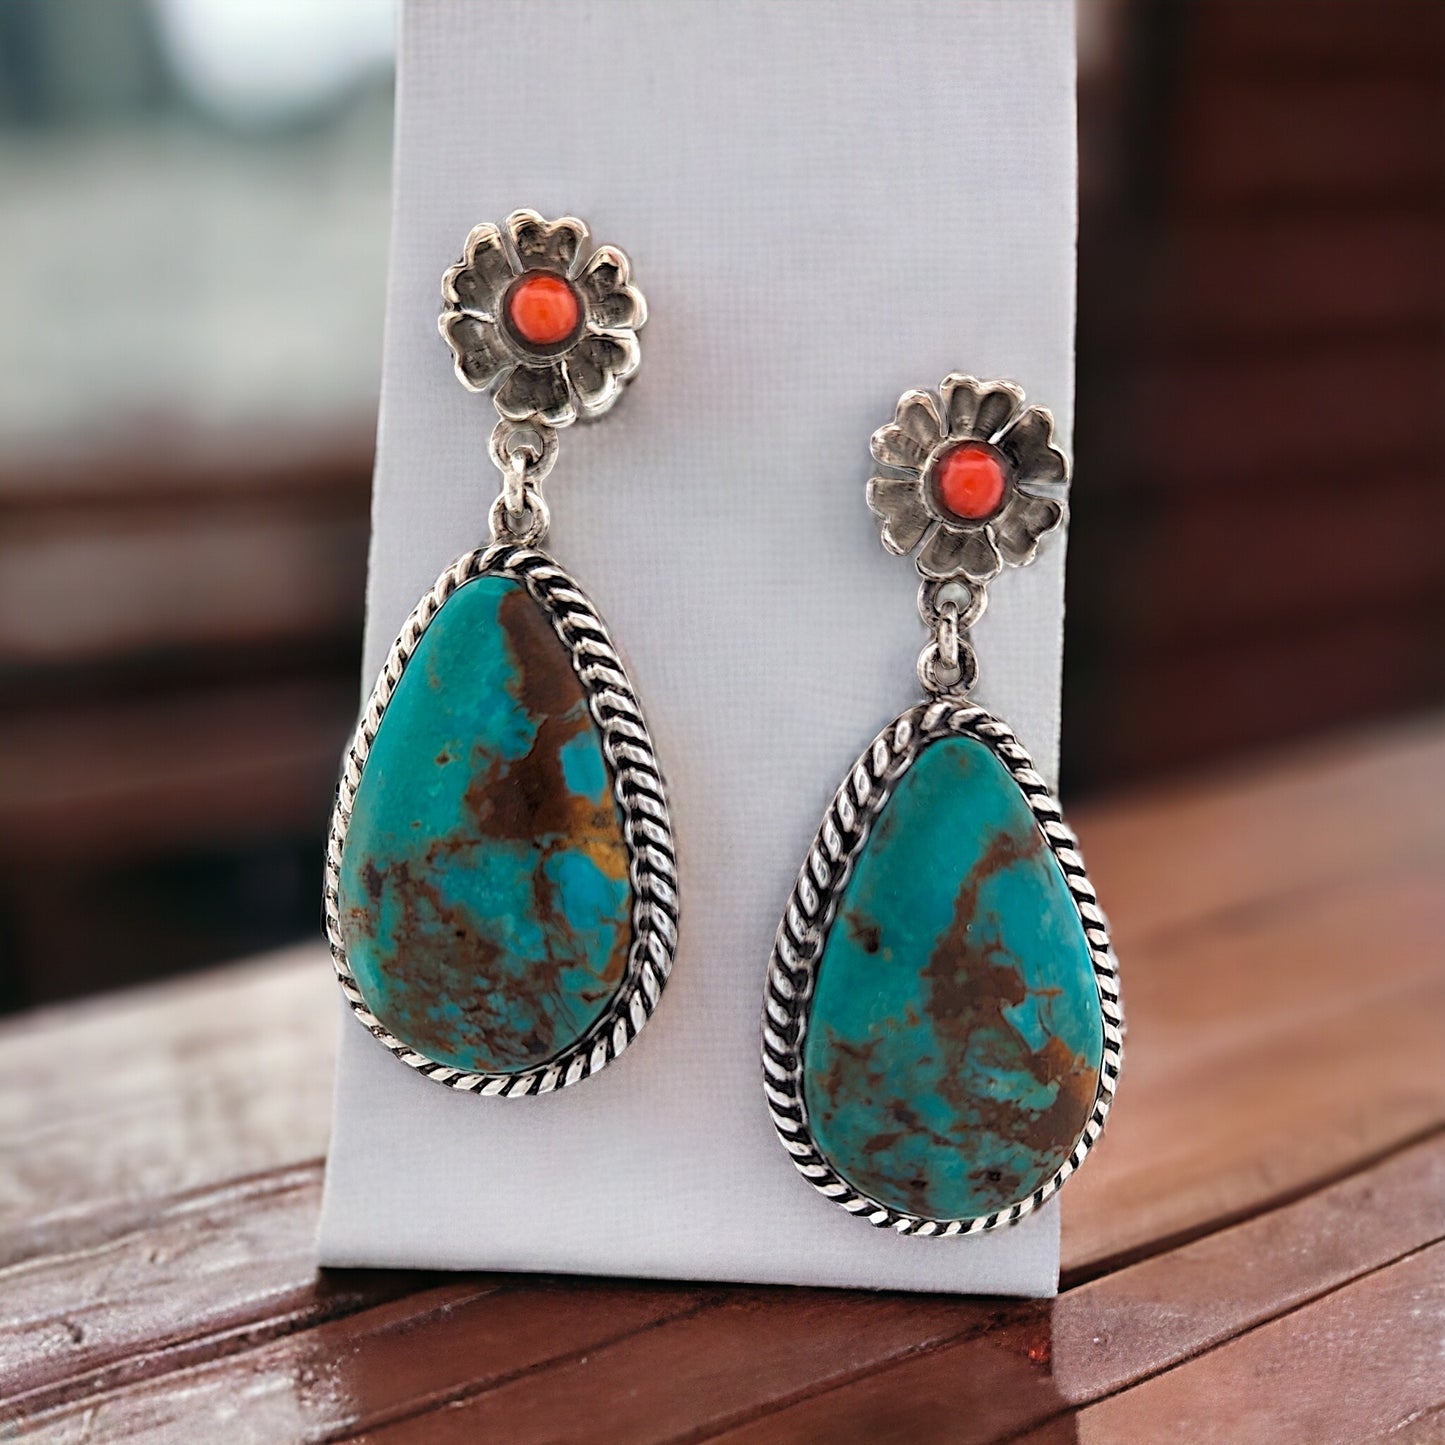 Prospector Springs | Handcrafted Sterling Silver Earrings featuring Kingman Turquoise & Coral accents.